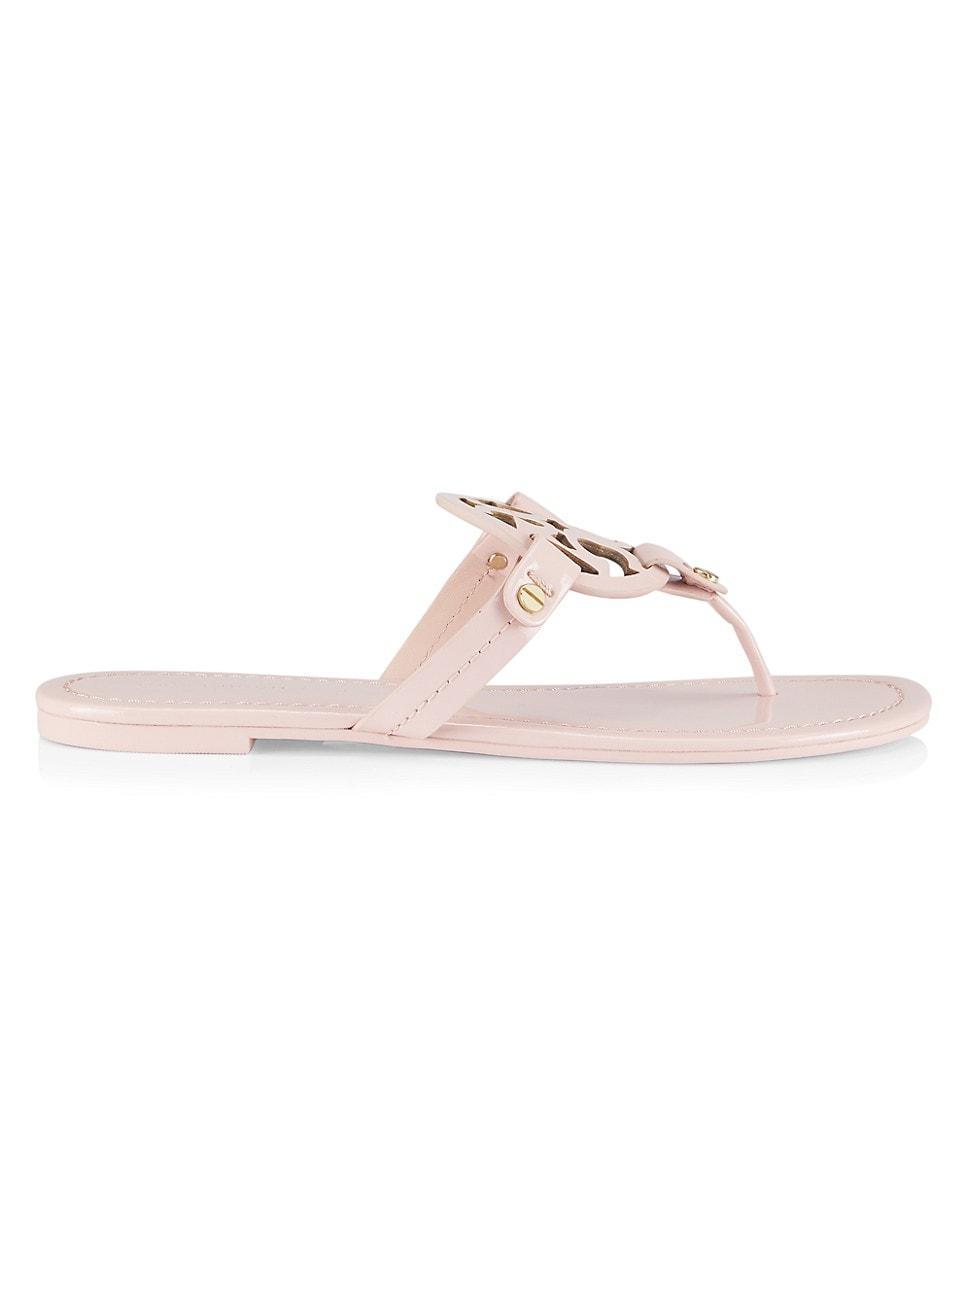 Womens Miller Patent Leather Thong Sandals Product Image